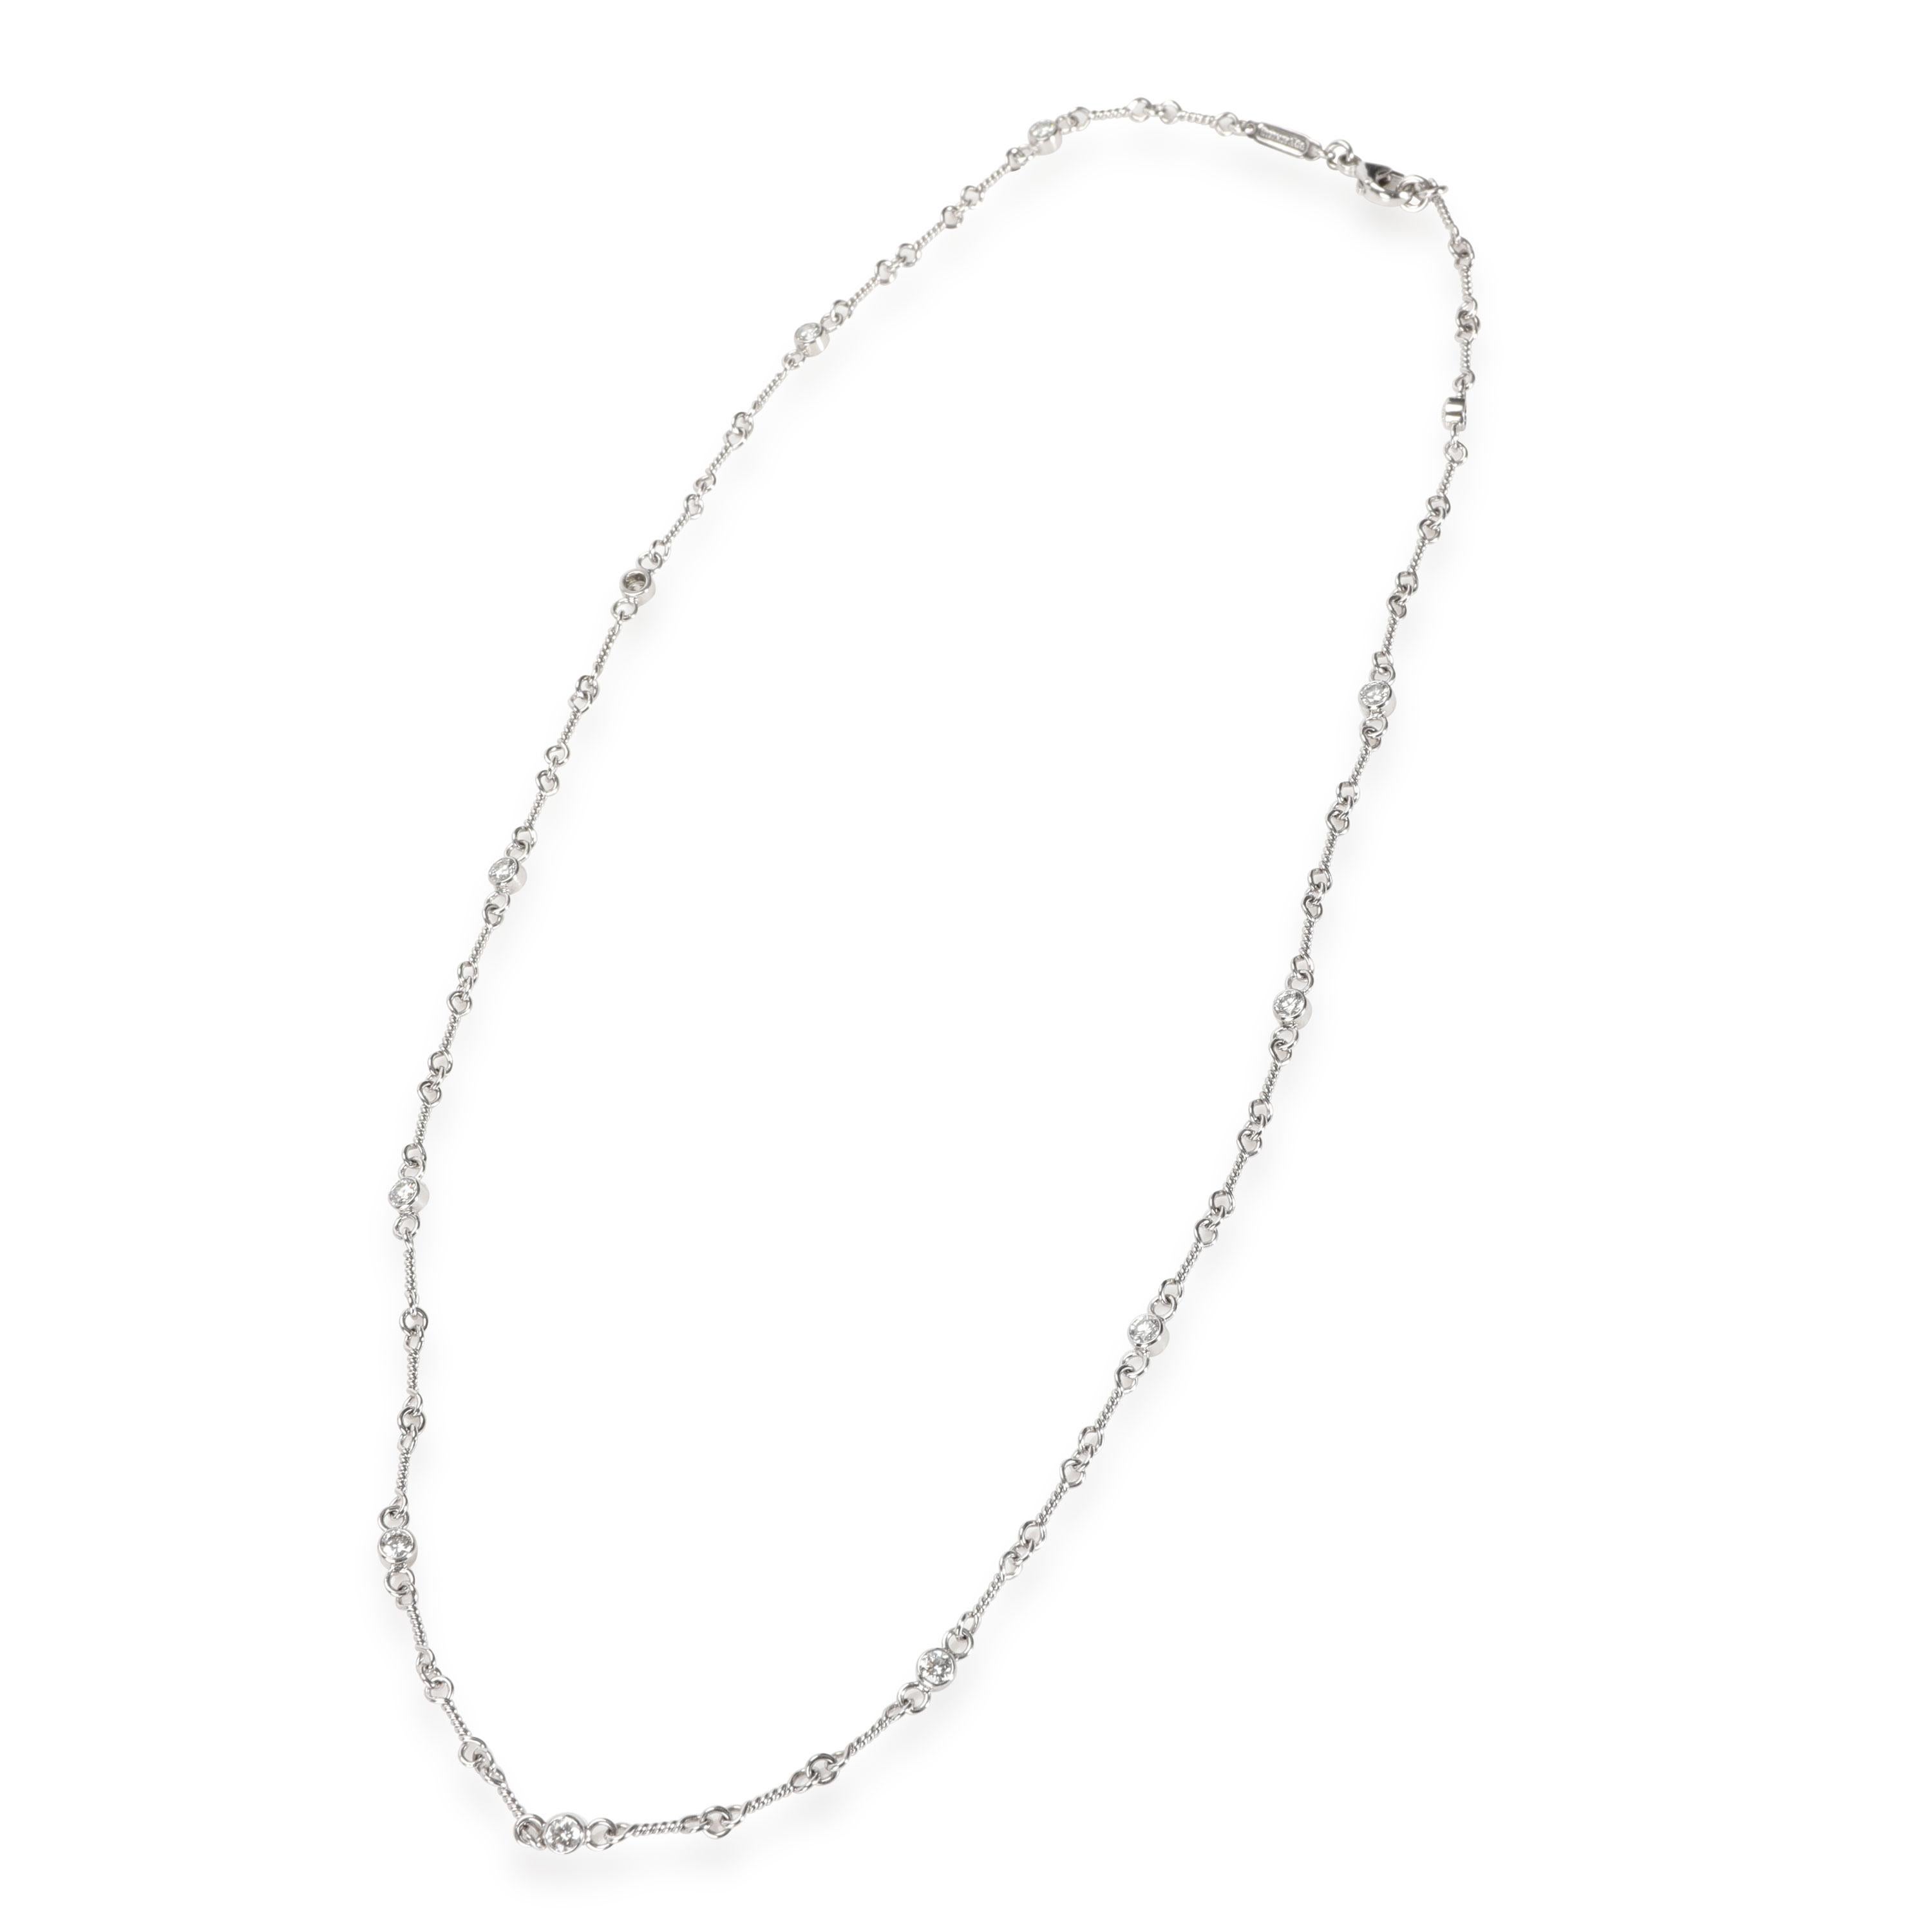 
Tiffany & Co. Twist Bar Diamond Necklace in Platinum 0.75 CTW

PRIMARY DETAILS
SKU: 110965
Listing Title: Tiffany & Co. Twist Bar Diamond Necklace in Platinum 0.75 CTW
Condition Description: Retails for 7,000 USD. In excellent condition and